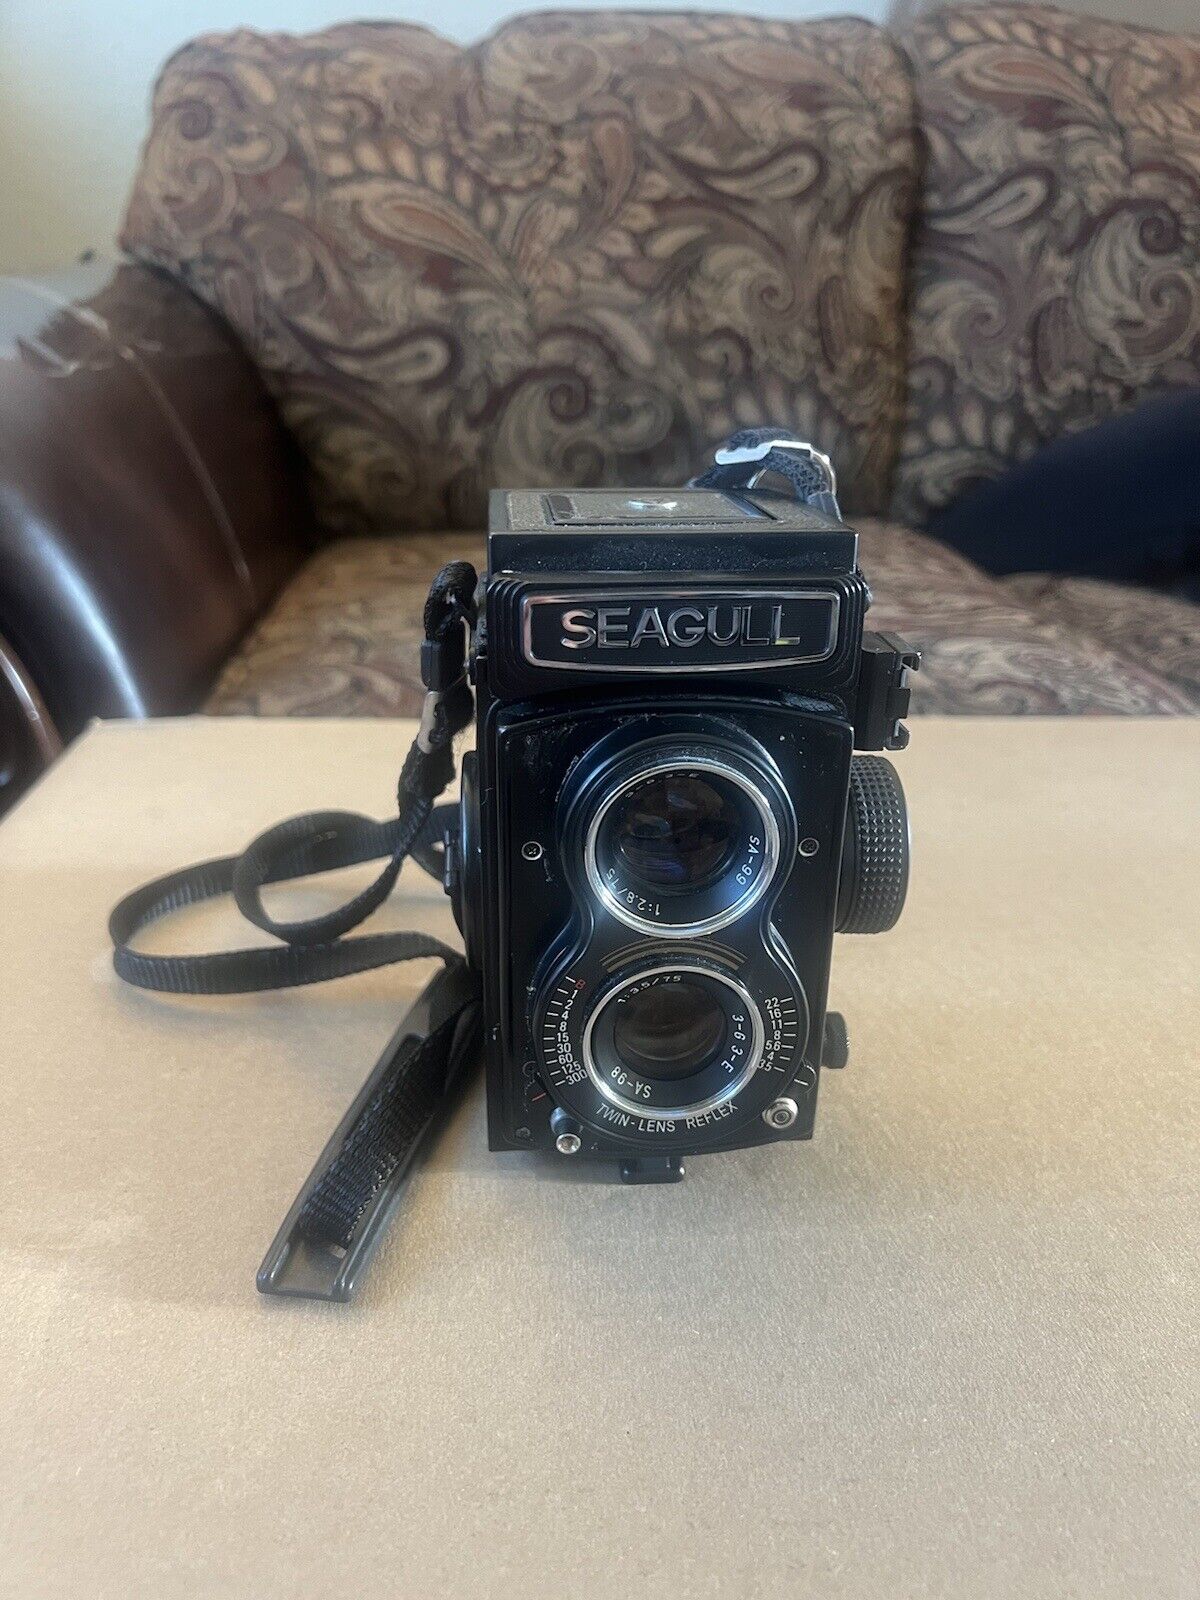 Seagull 4B-1 6X6 TLR Camera with 75mm F3.5 lens + cap + strap